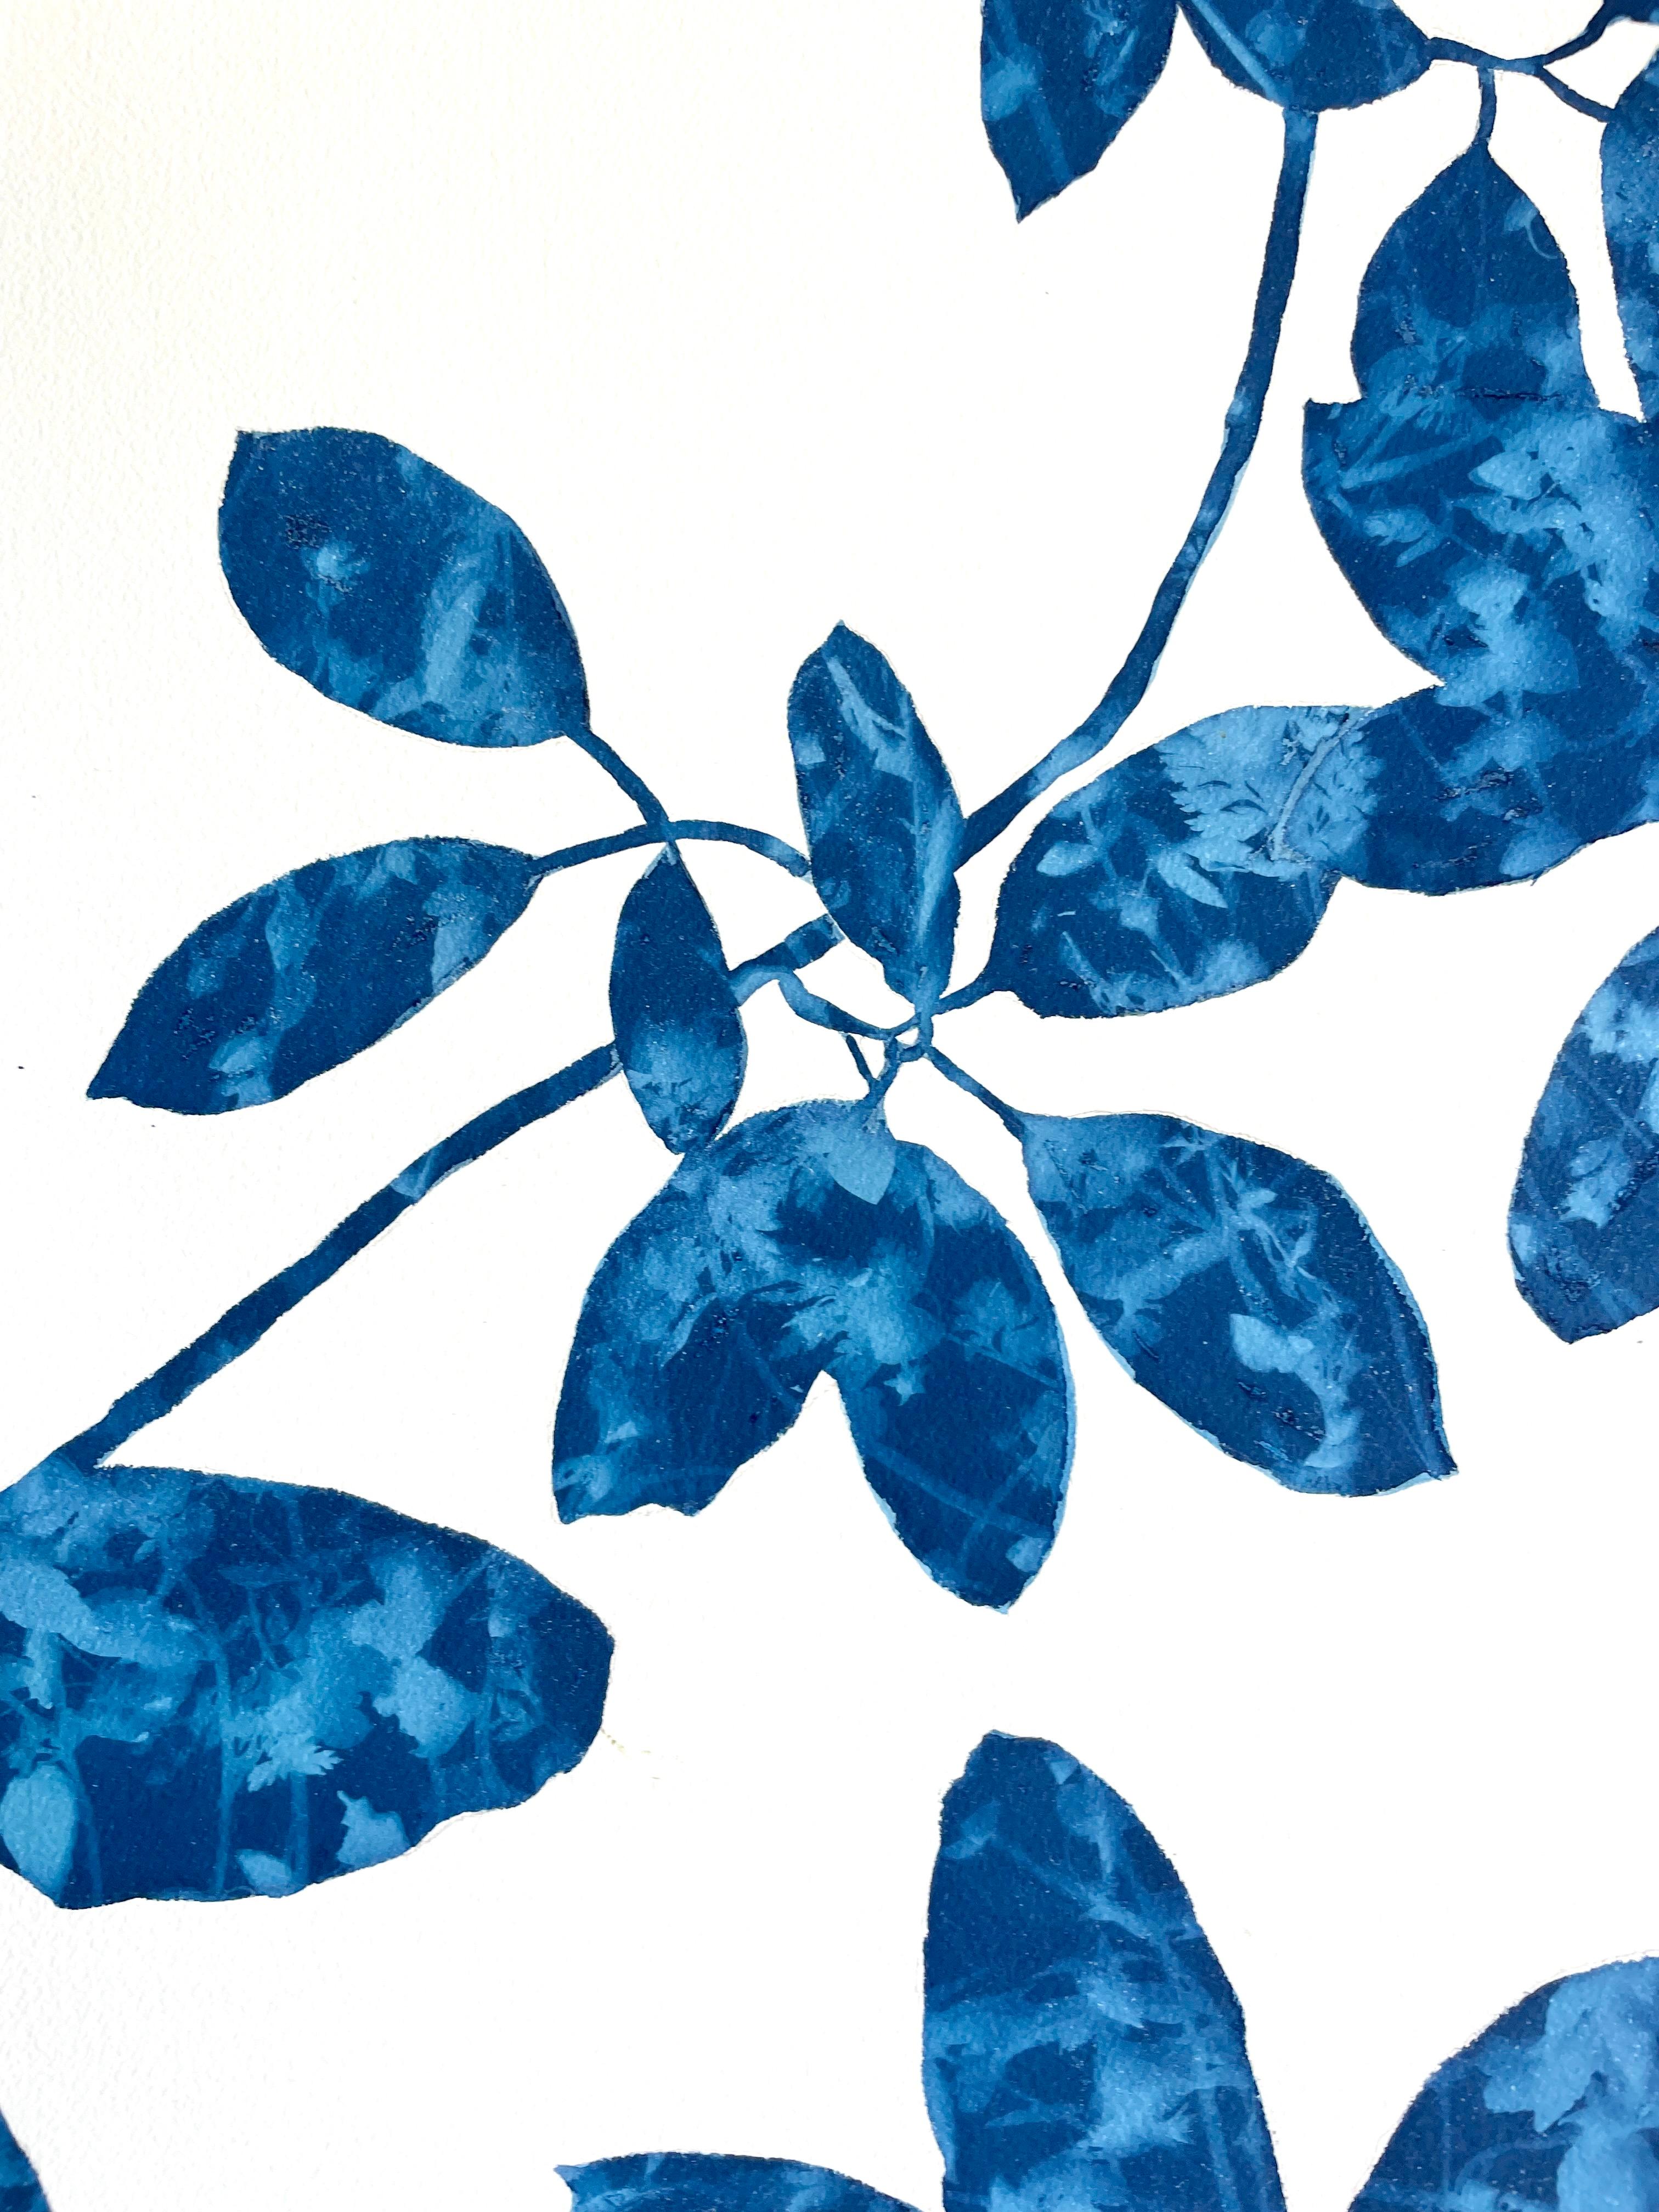 The intricate pattern seen in each tree leaf is is a combination of painting and photography, the antique cyanotype process. The silhouette of the plant was first drawn, then painted, not with ink or paint, but with light-sensitive photo emulsion.